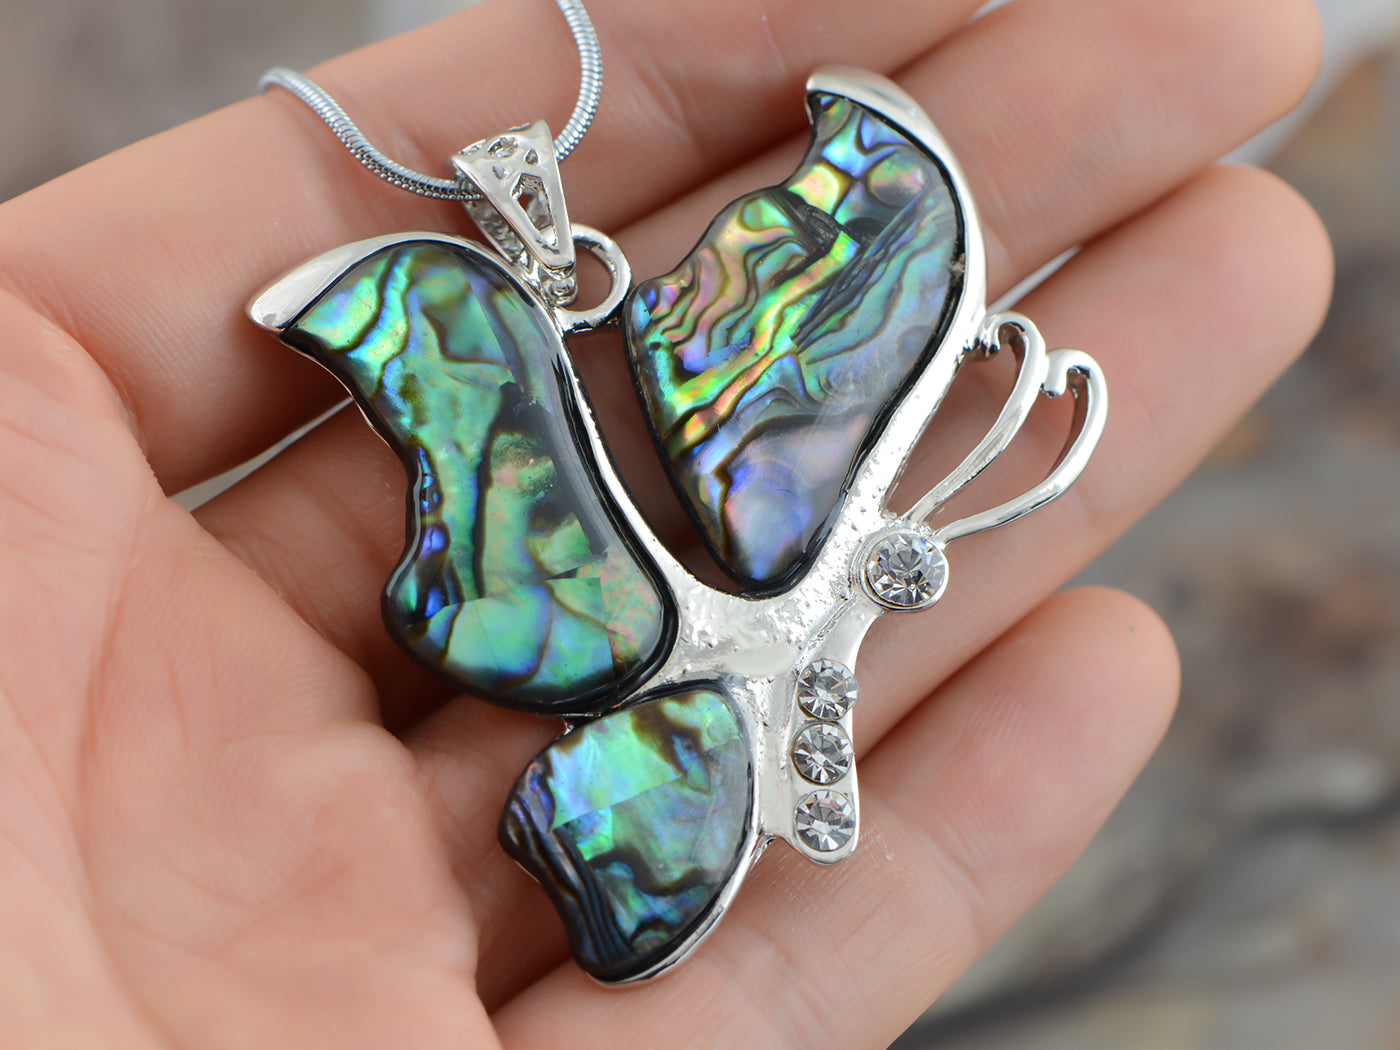 Natural Sea Shell Butterfly Necklace Pendant